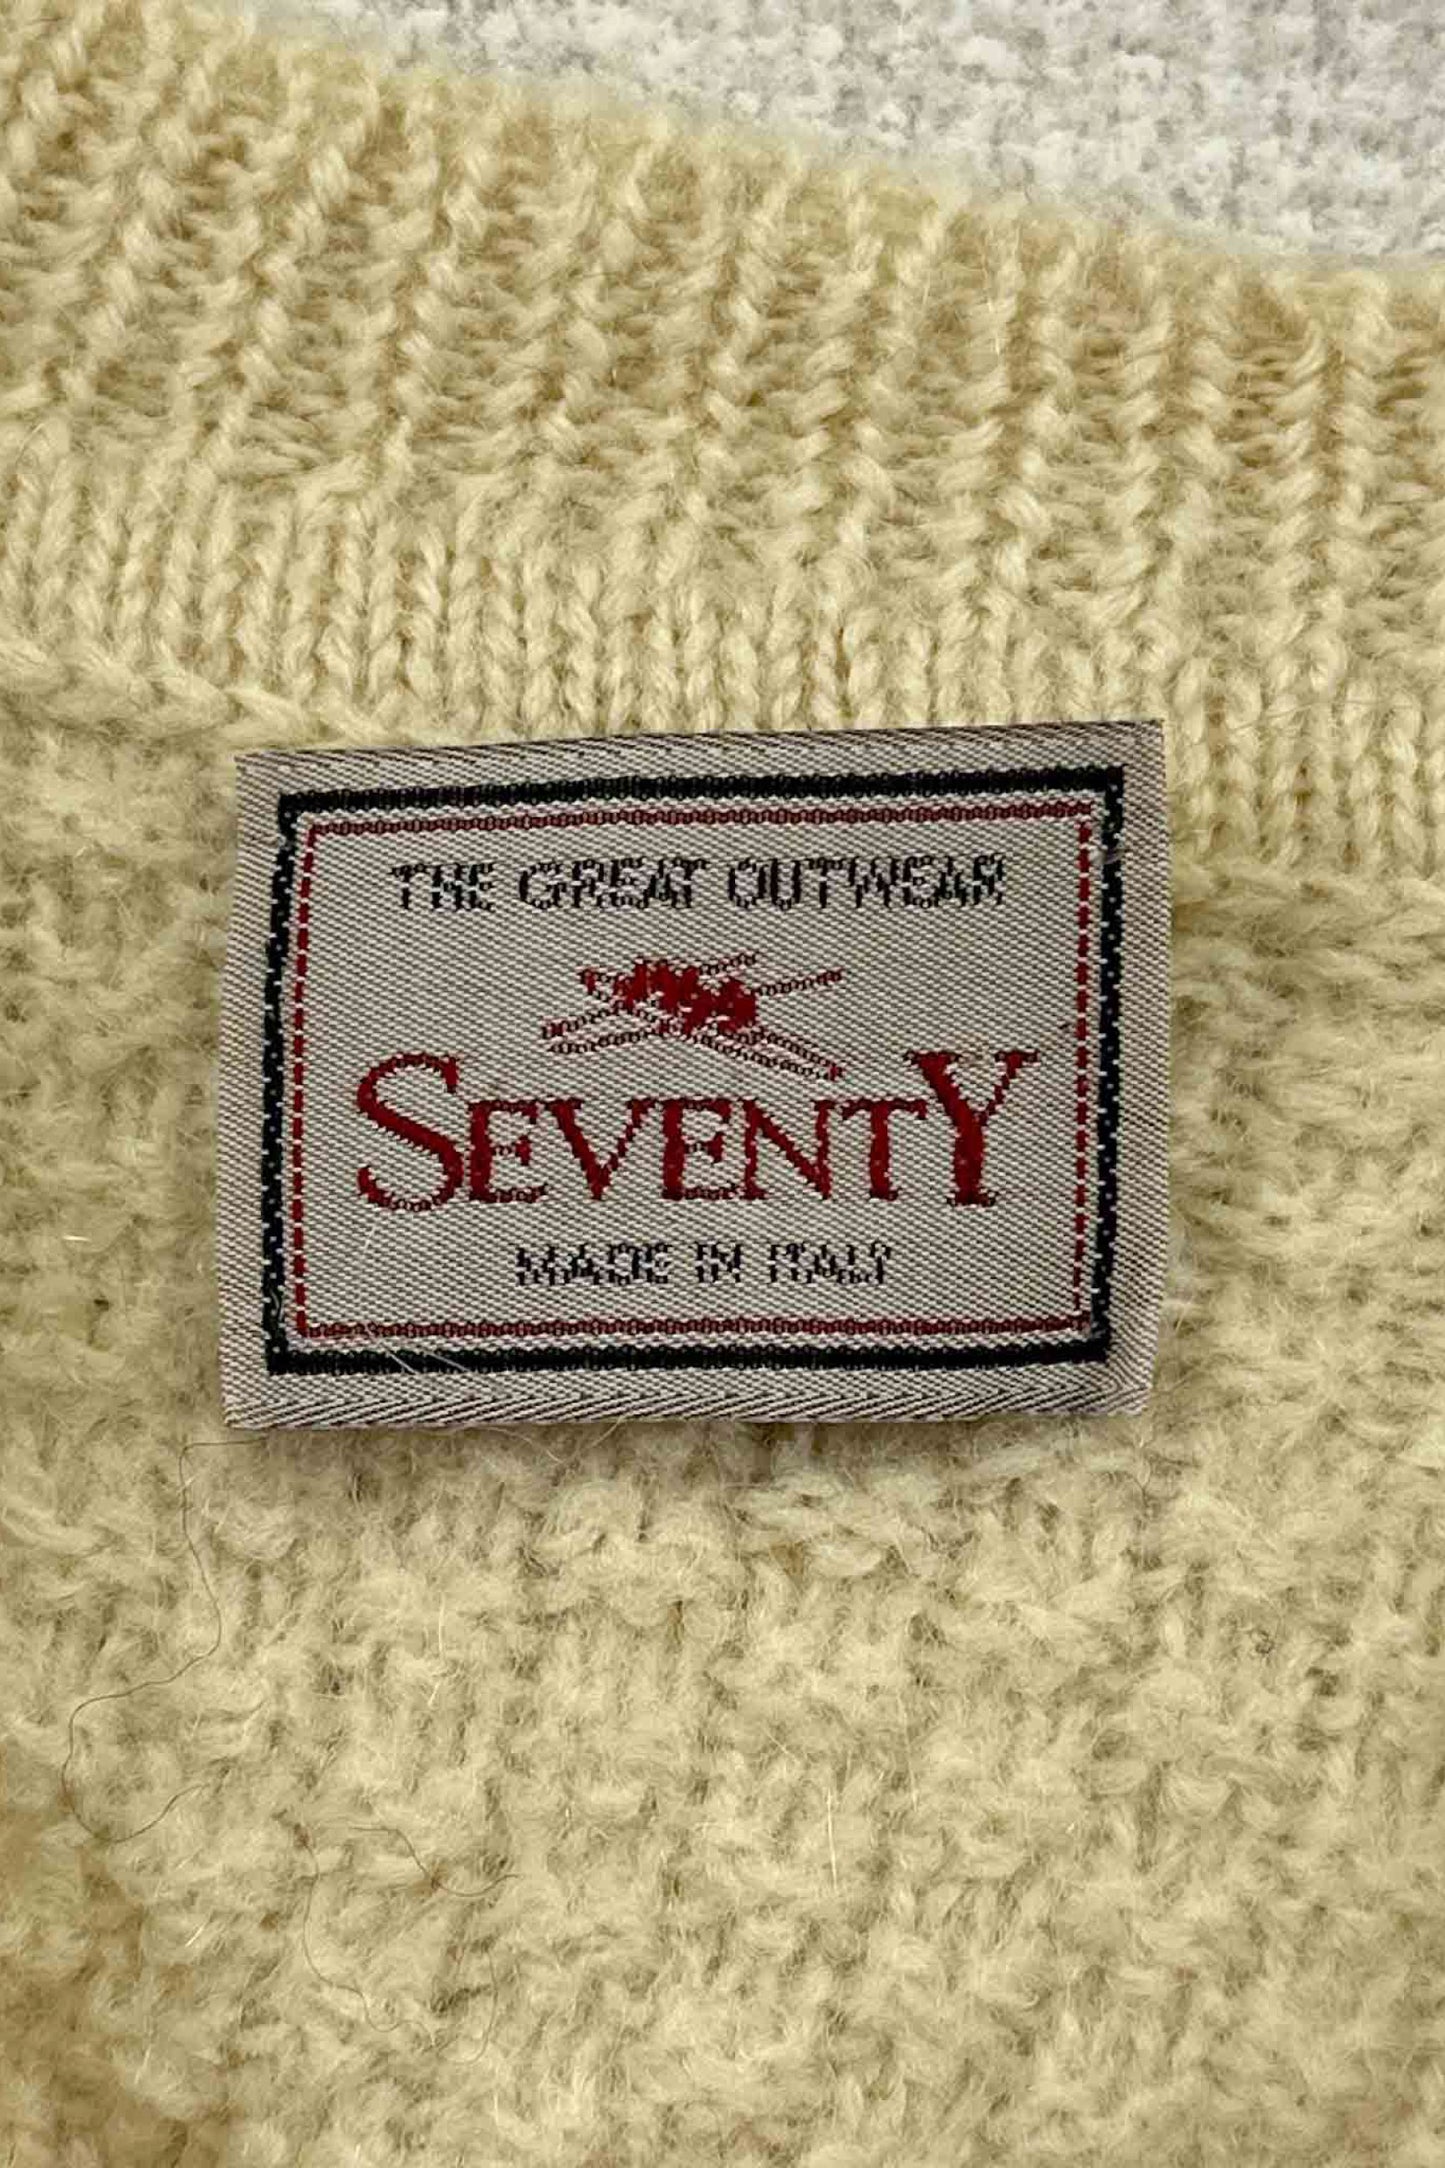 Made in ITALY SEVENTY white sweater